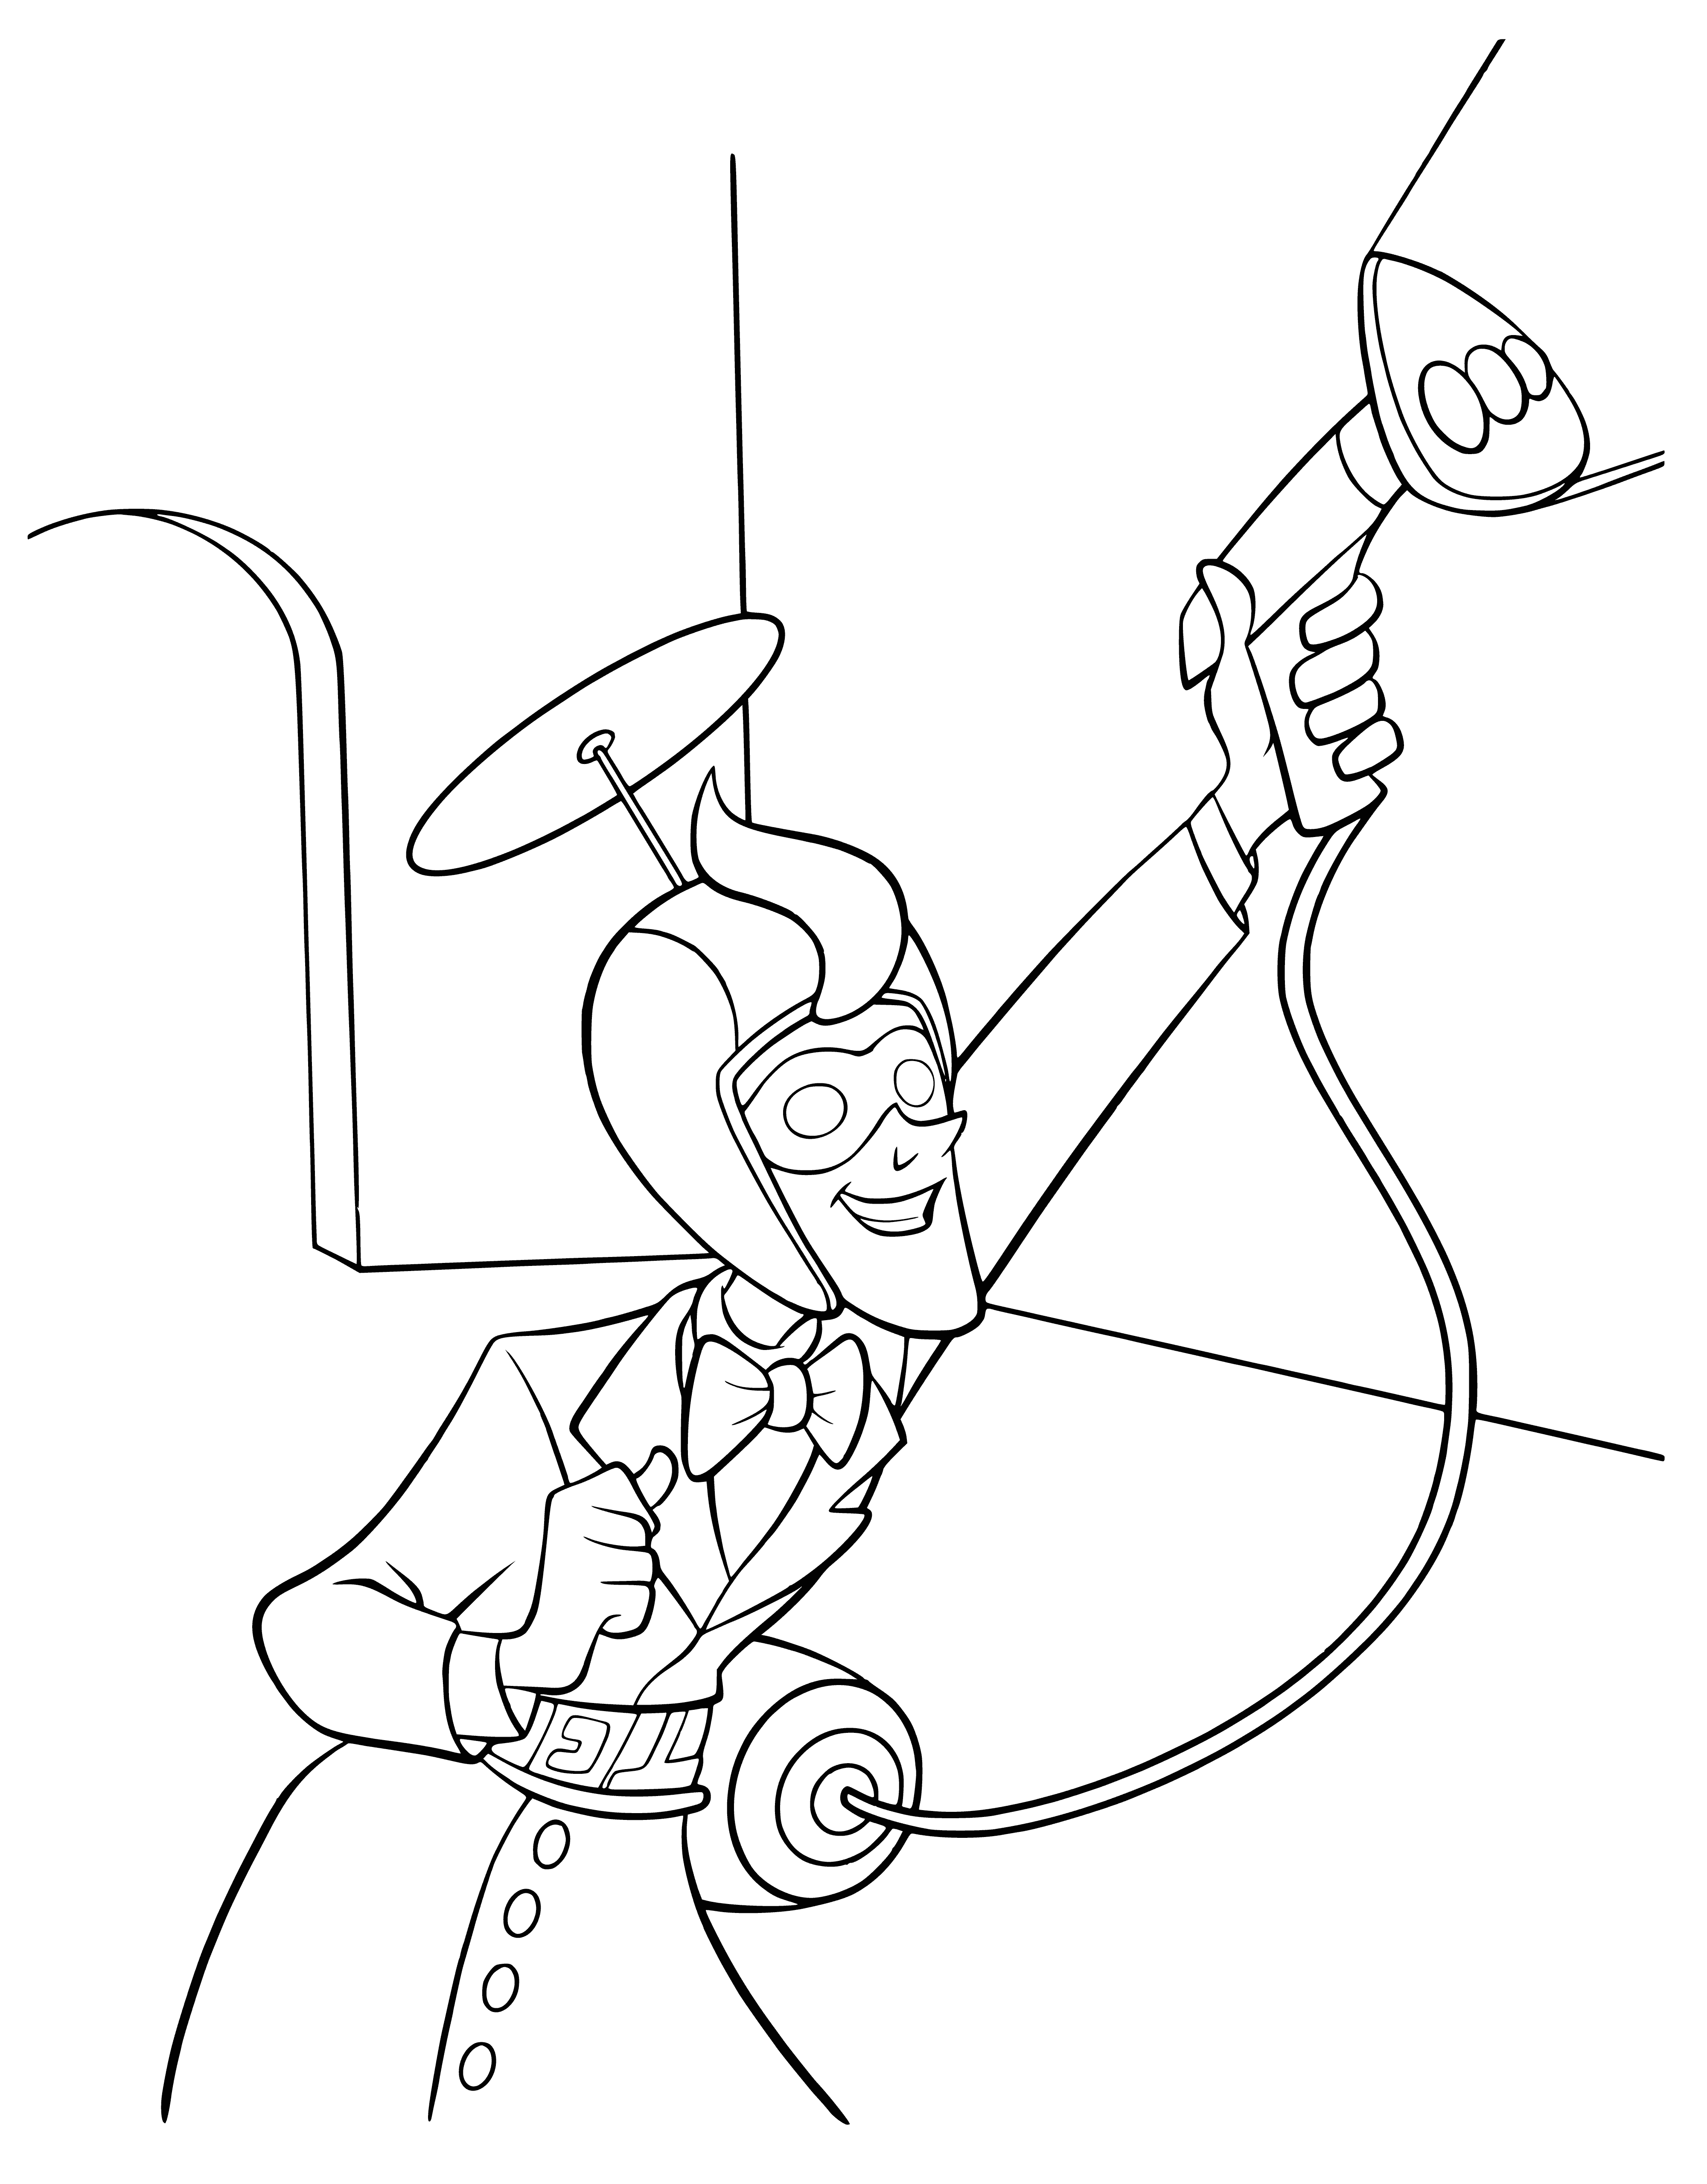 coloring page: Meet the Robinsons - Miracle pistol is a silver gun w/ black grip, long barrel, rectangular front sight & small black knob on top.